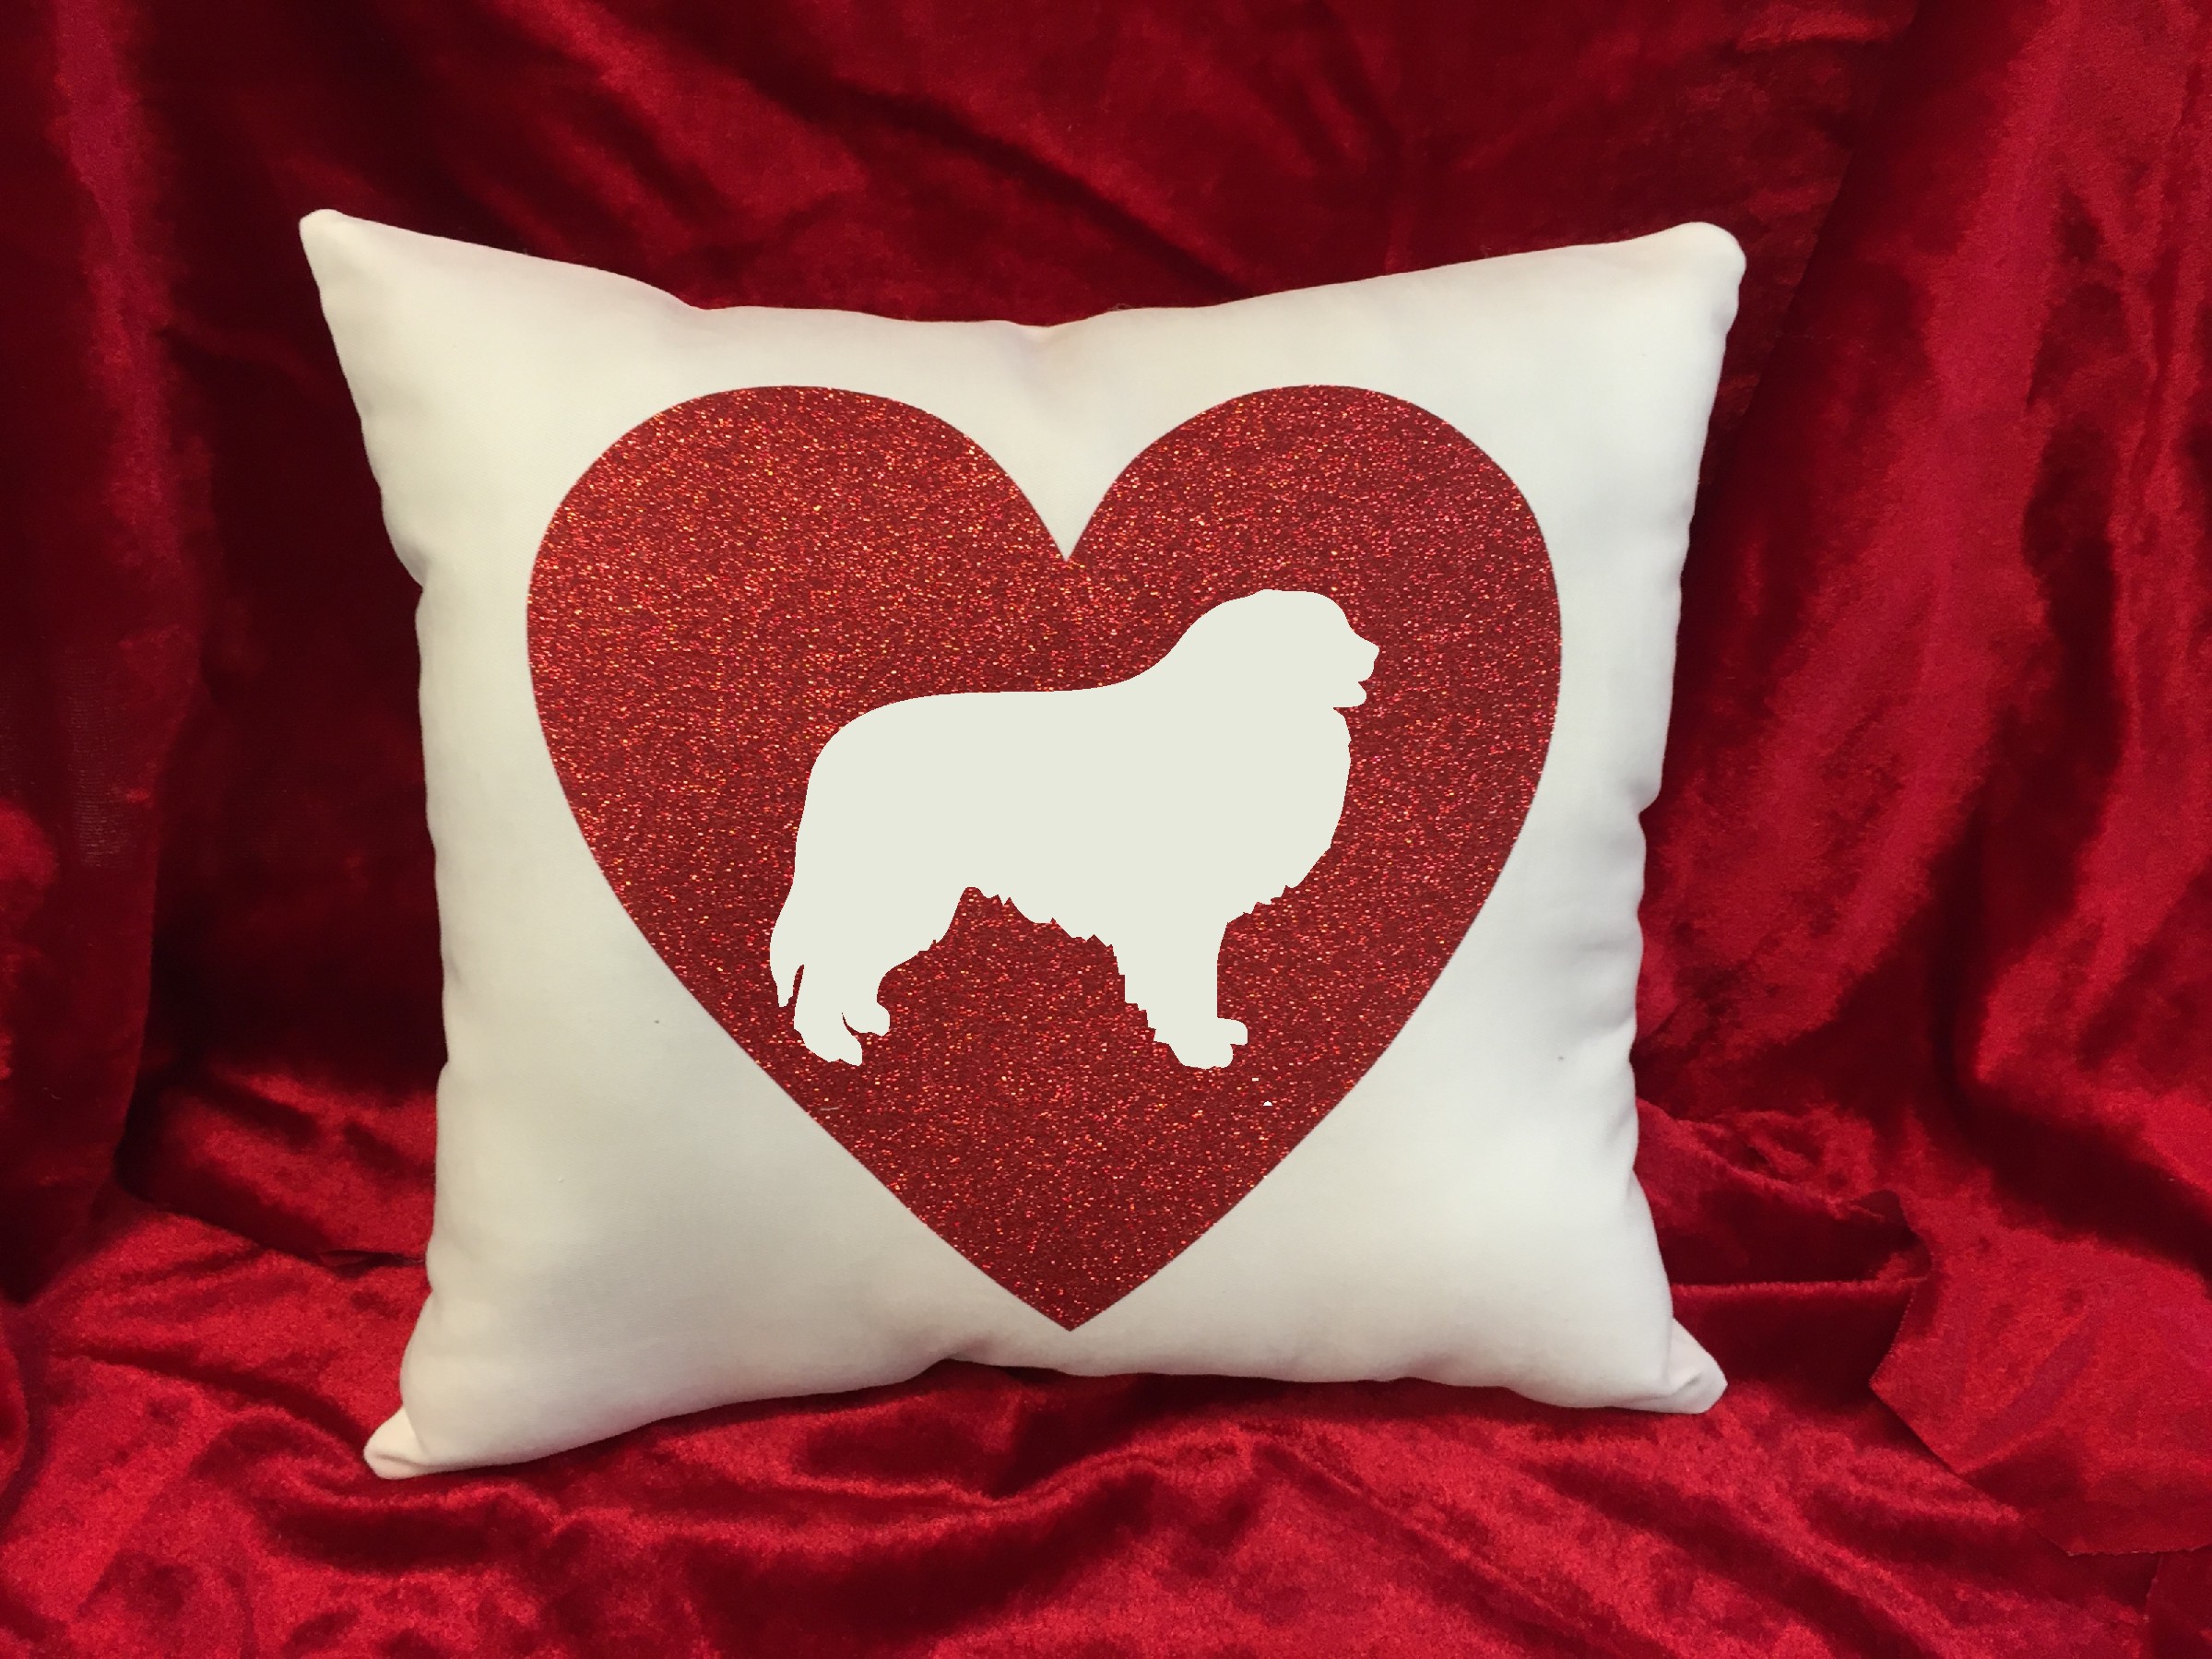 Dogs - Throw Pillow - Great Pyrenees